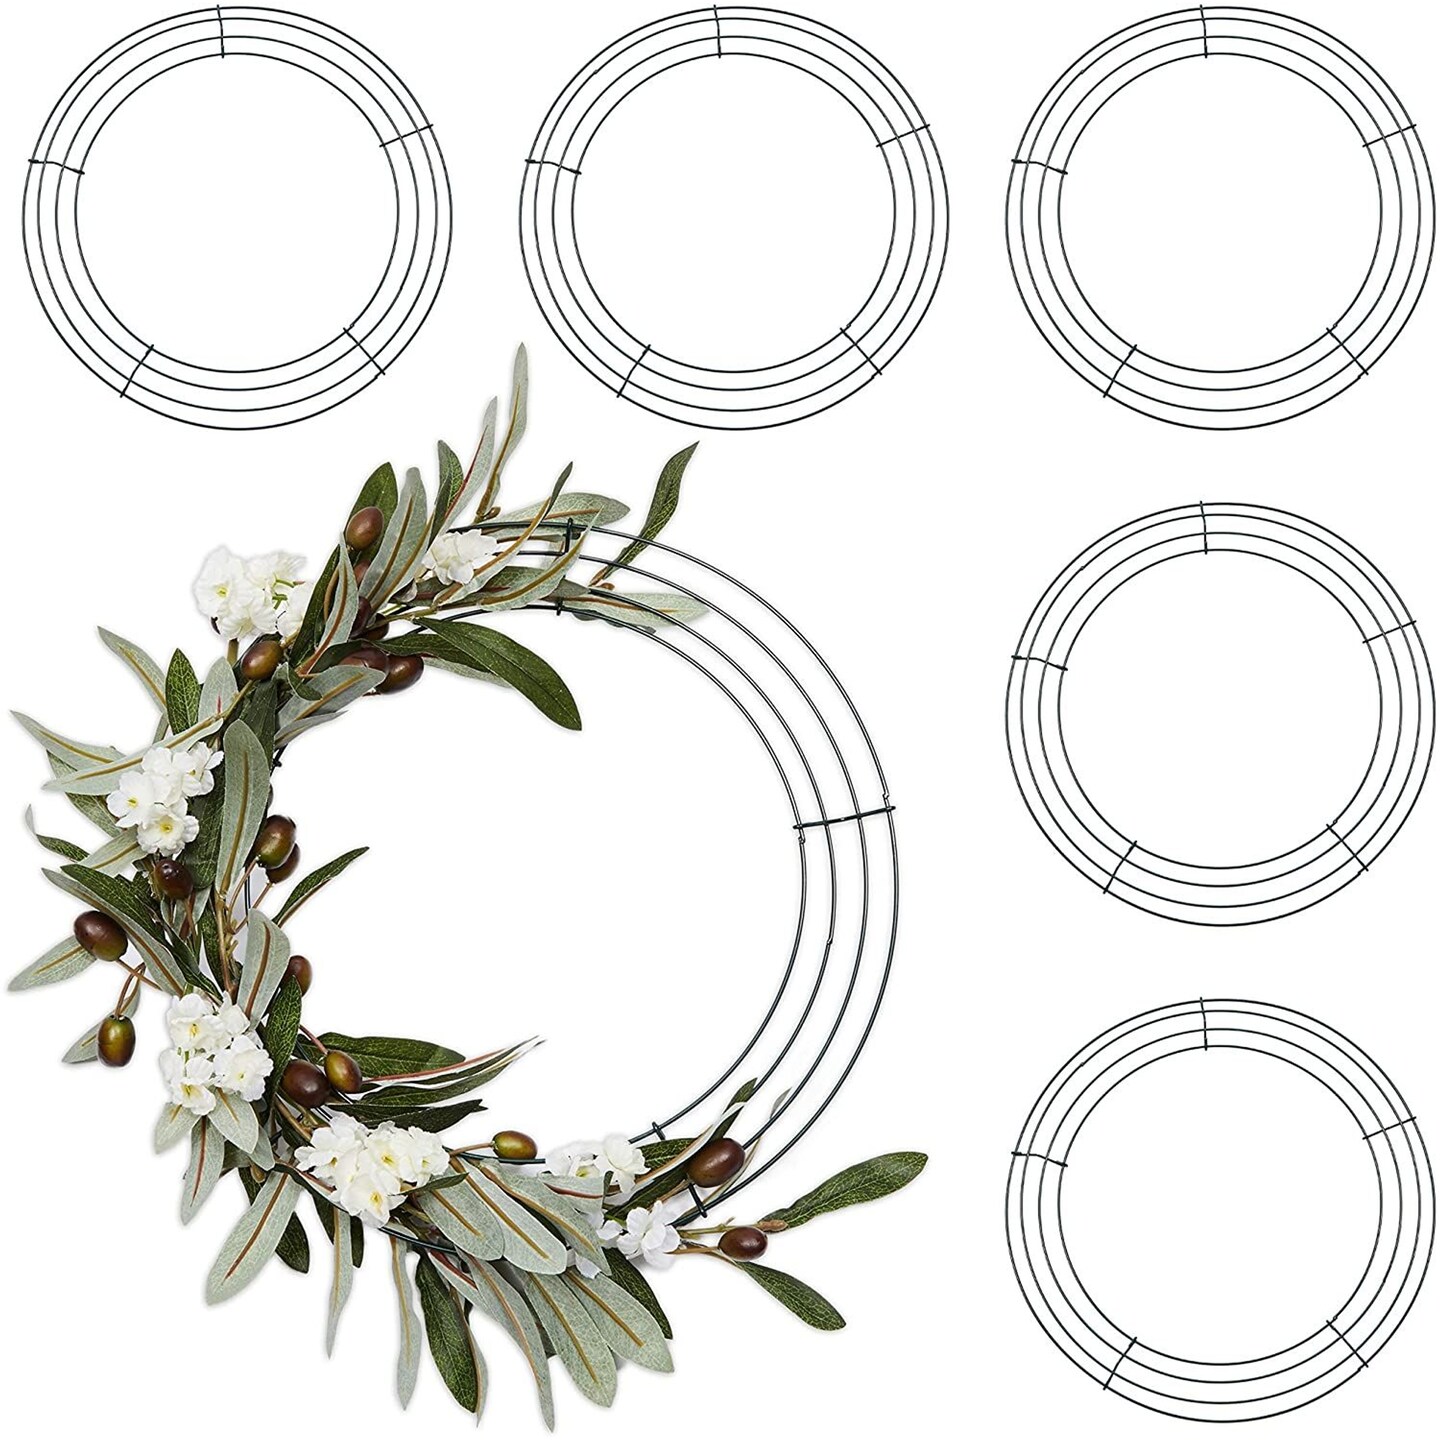 Wire Wreath Frames, 16 Inch Metal Floral Rings for Front Door Decor, DIY Projects, Wall Hanging Crafts (Dark Green, 6 Pack)